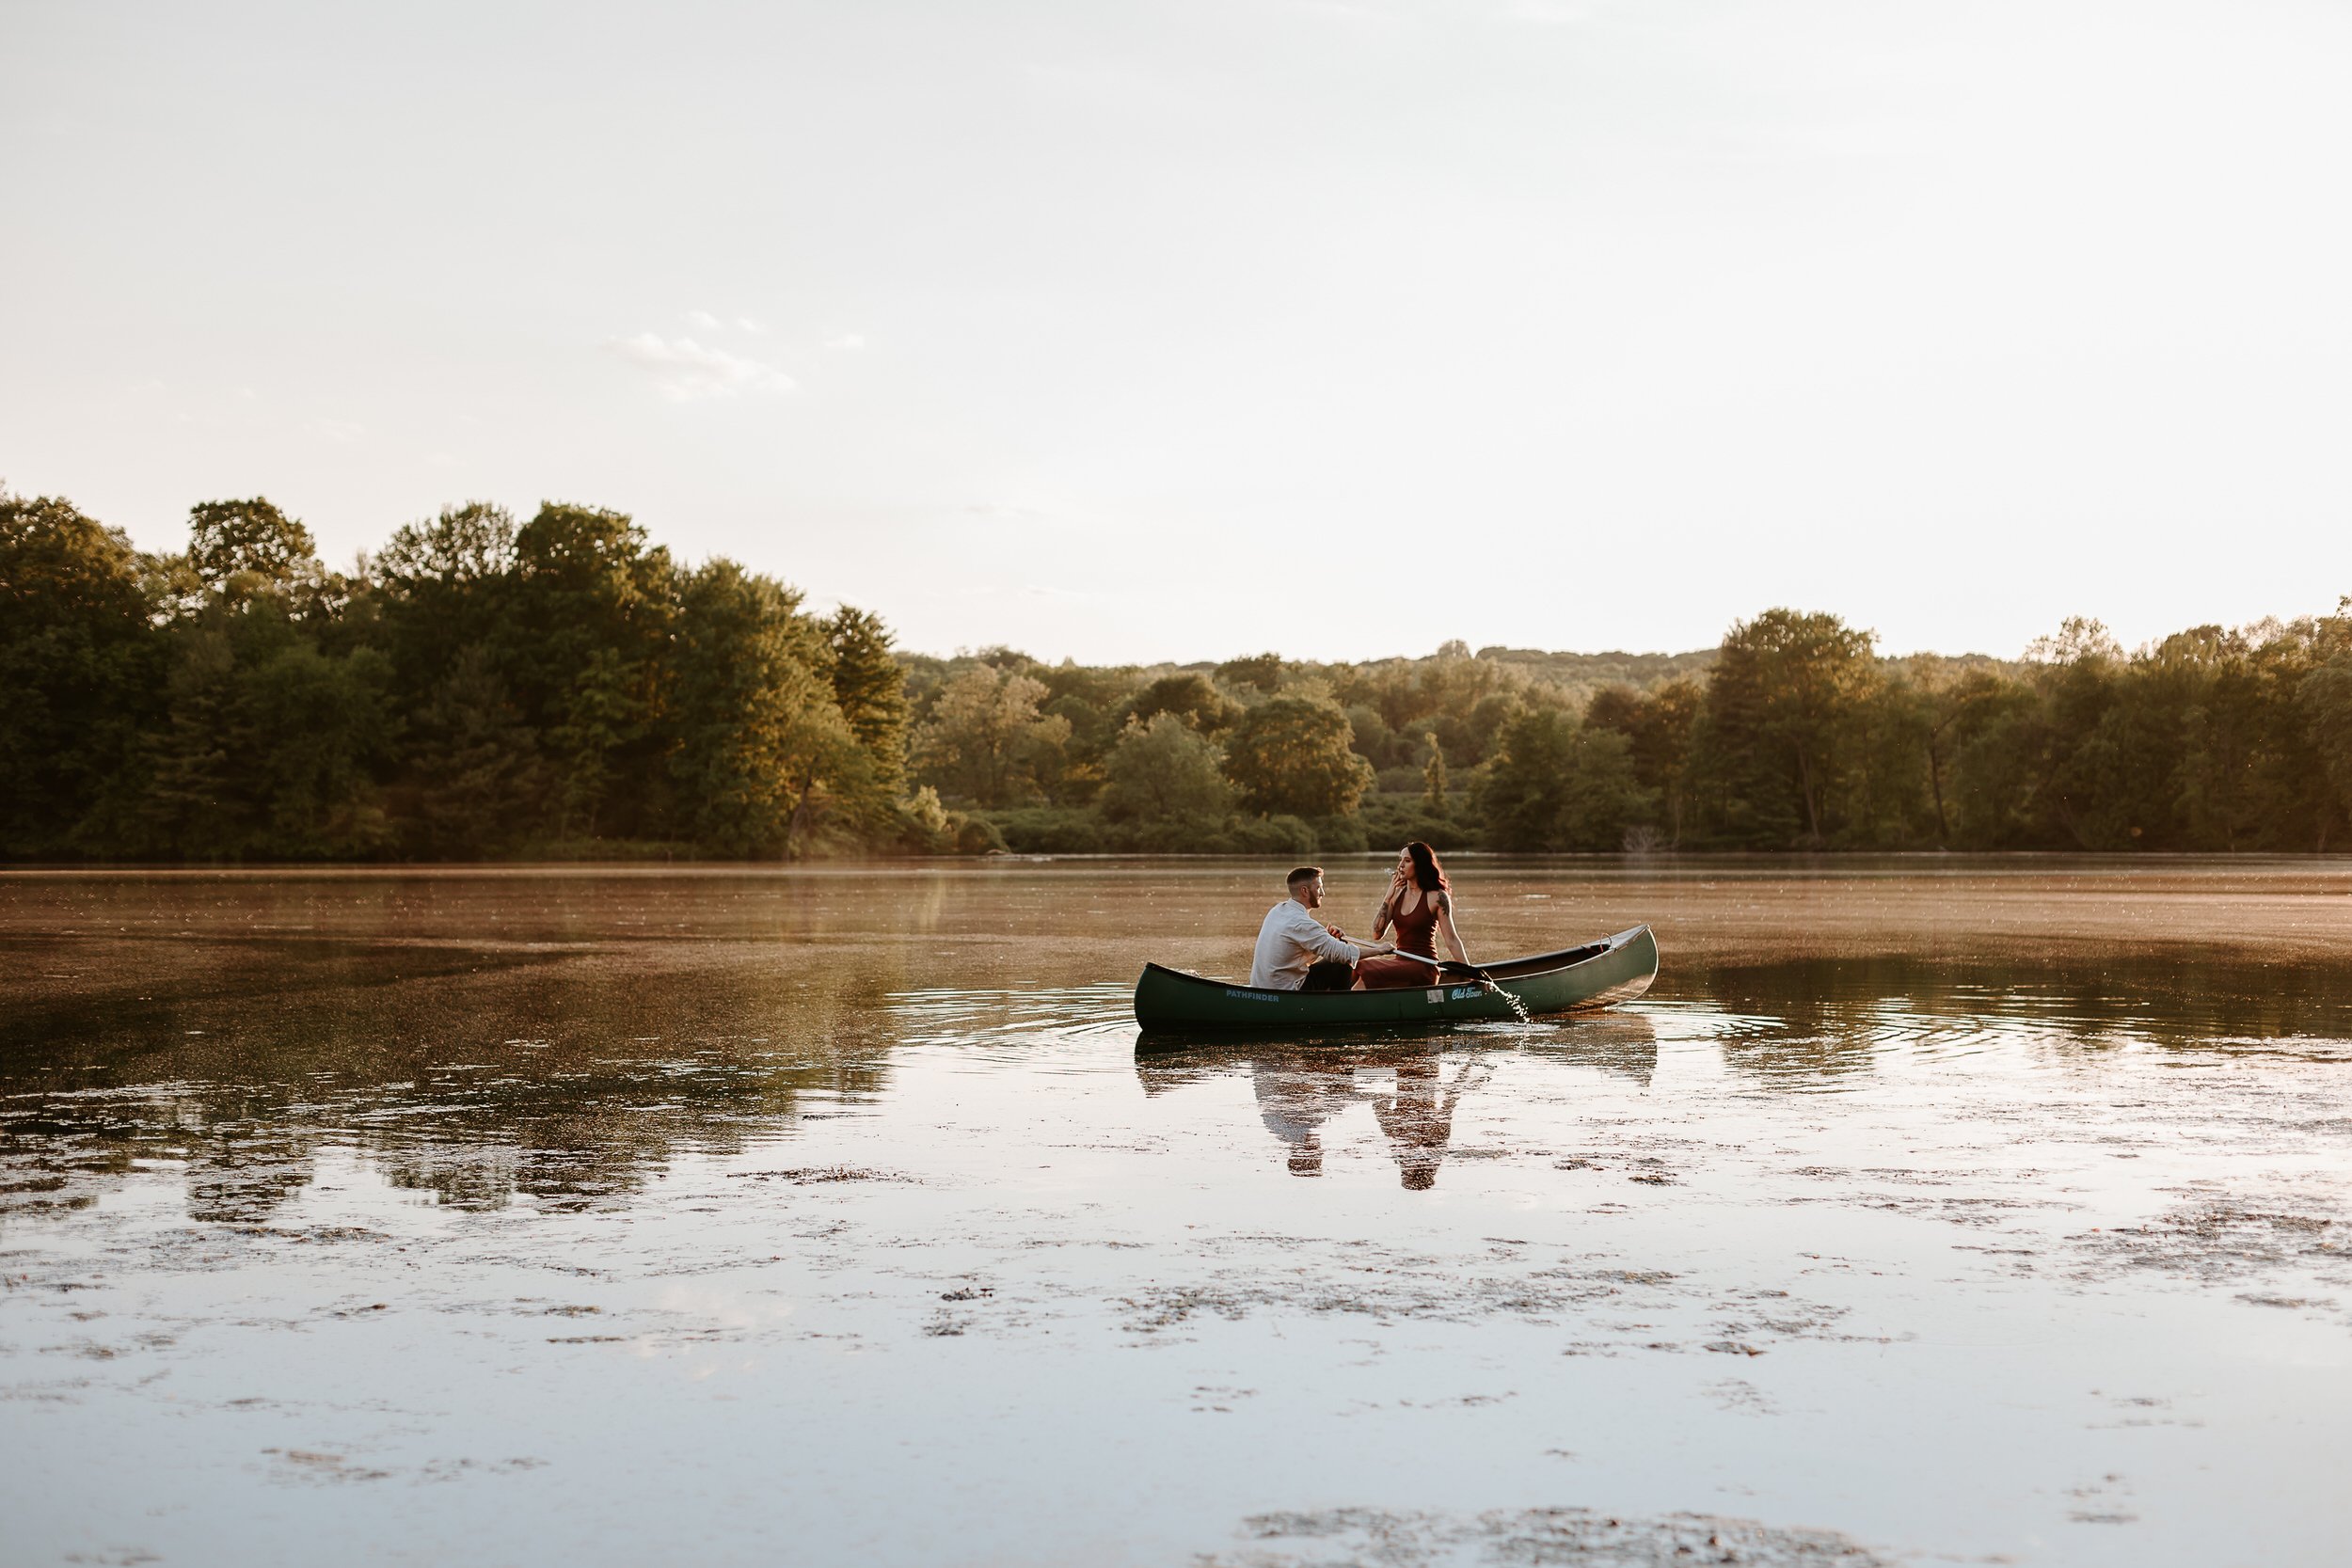 Man and woman are in a canoe out on a lake.